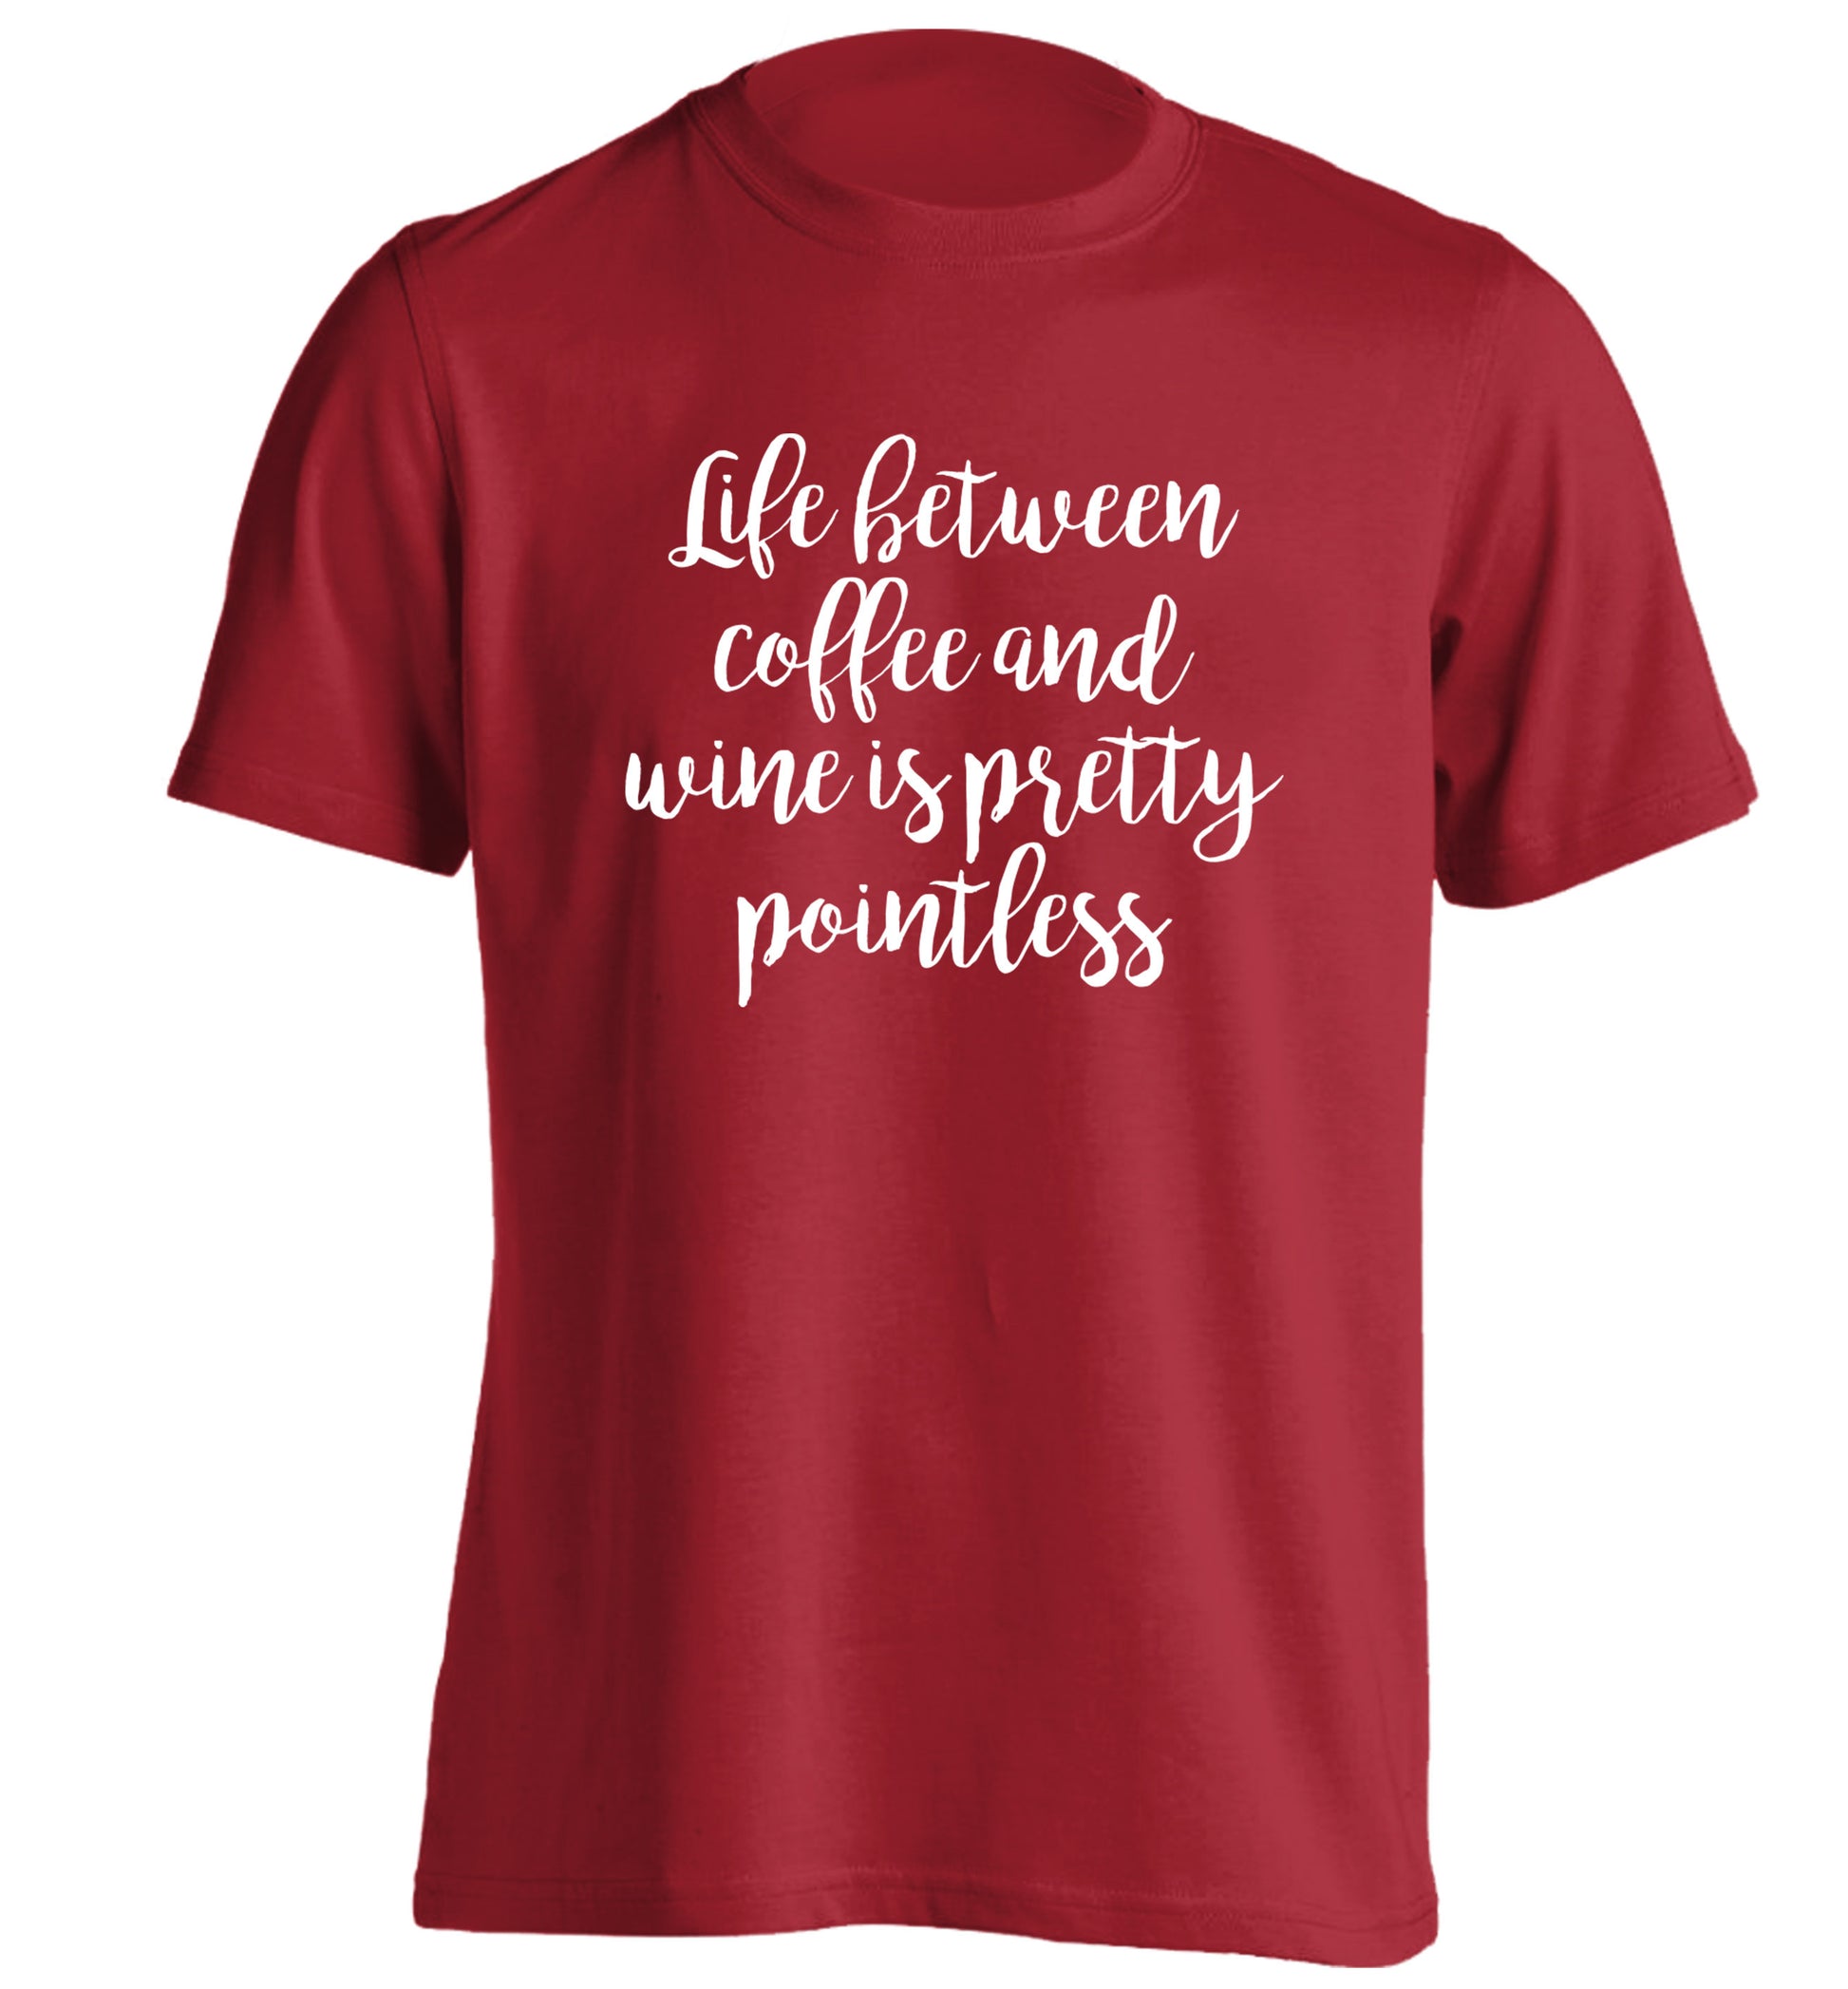 Life between coffee and wine is pretty pointless adults unisex red Tshirt 2XL